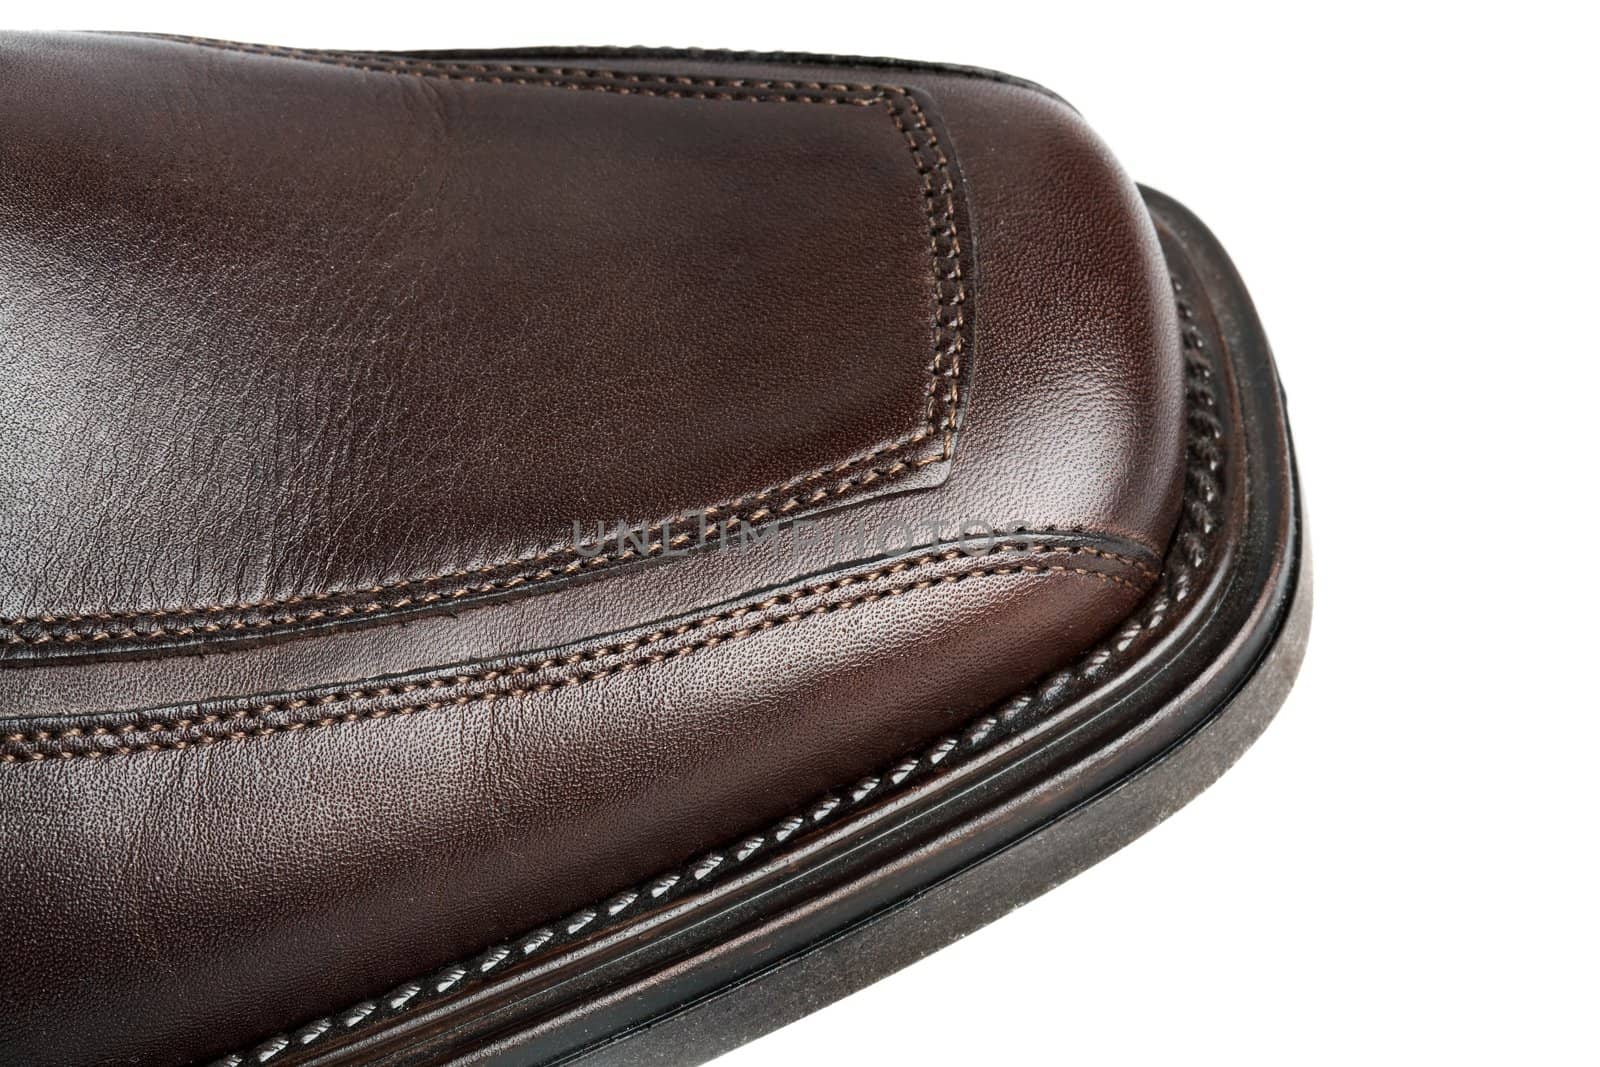 Detail of a men's brown leather shoe